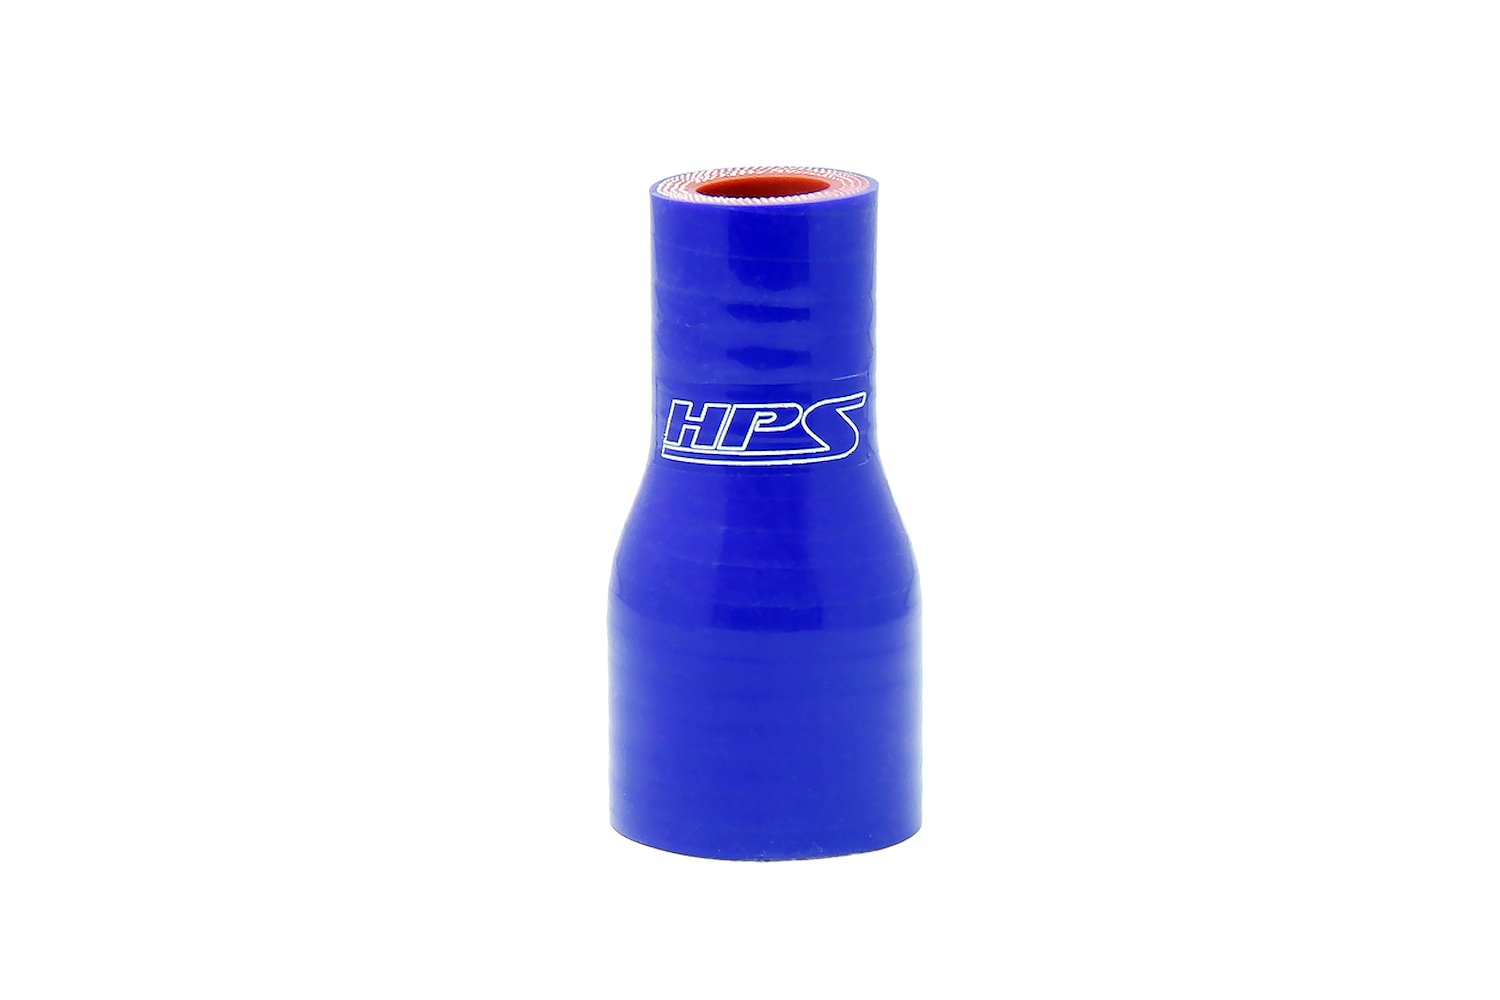 HTSR-038-050-BLUE Silicone Reducer Hose, High-Temp 4-Ply Reinforced, 3/8 in. - 1/2 in. ID, 4 in. Long, Blue